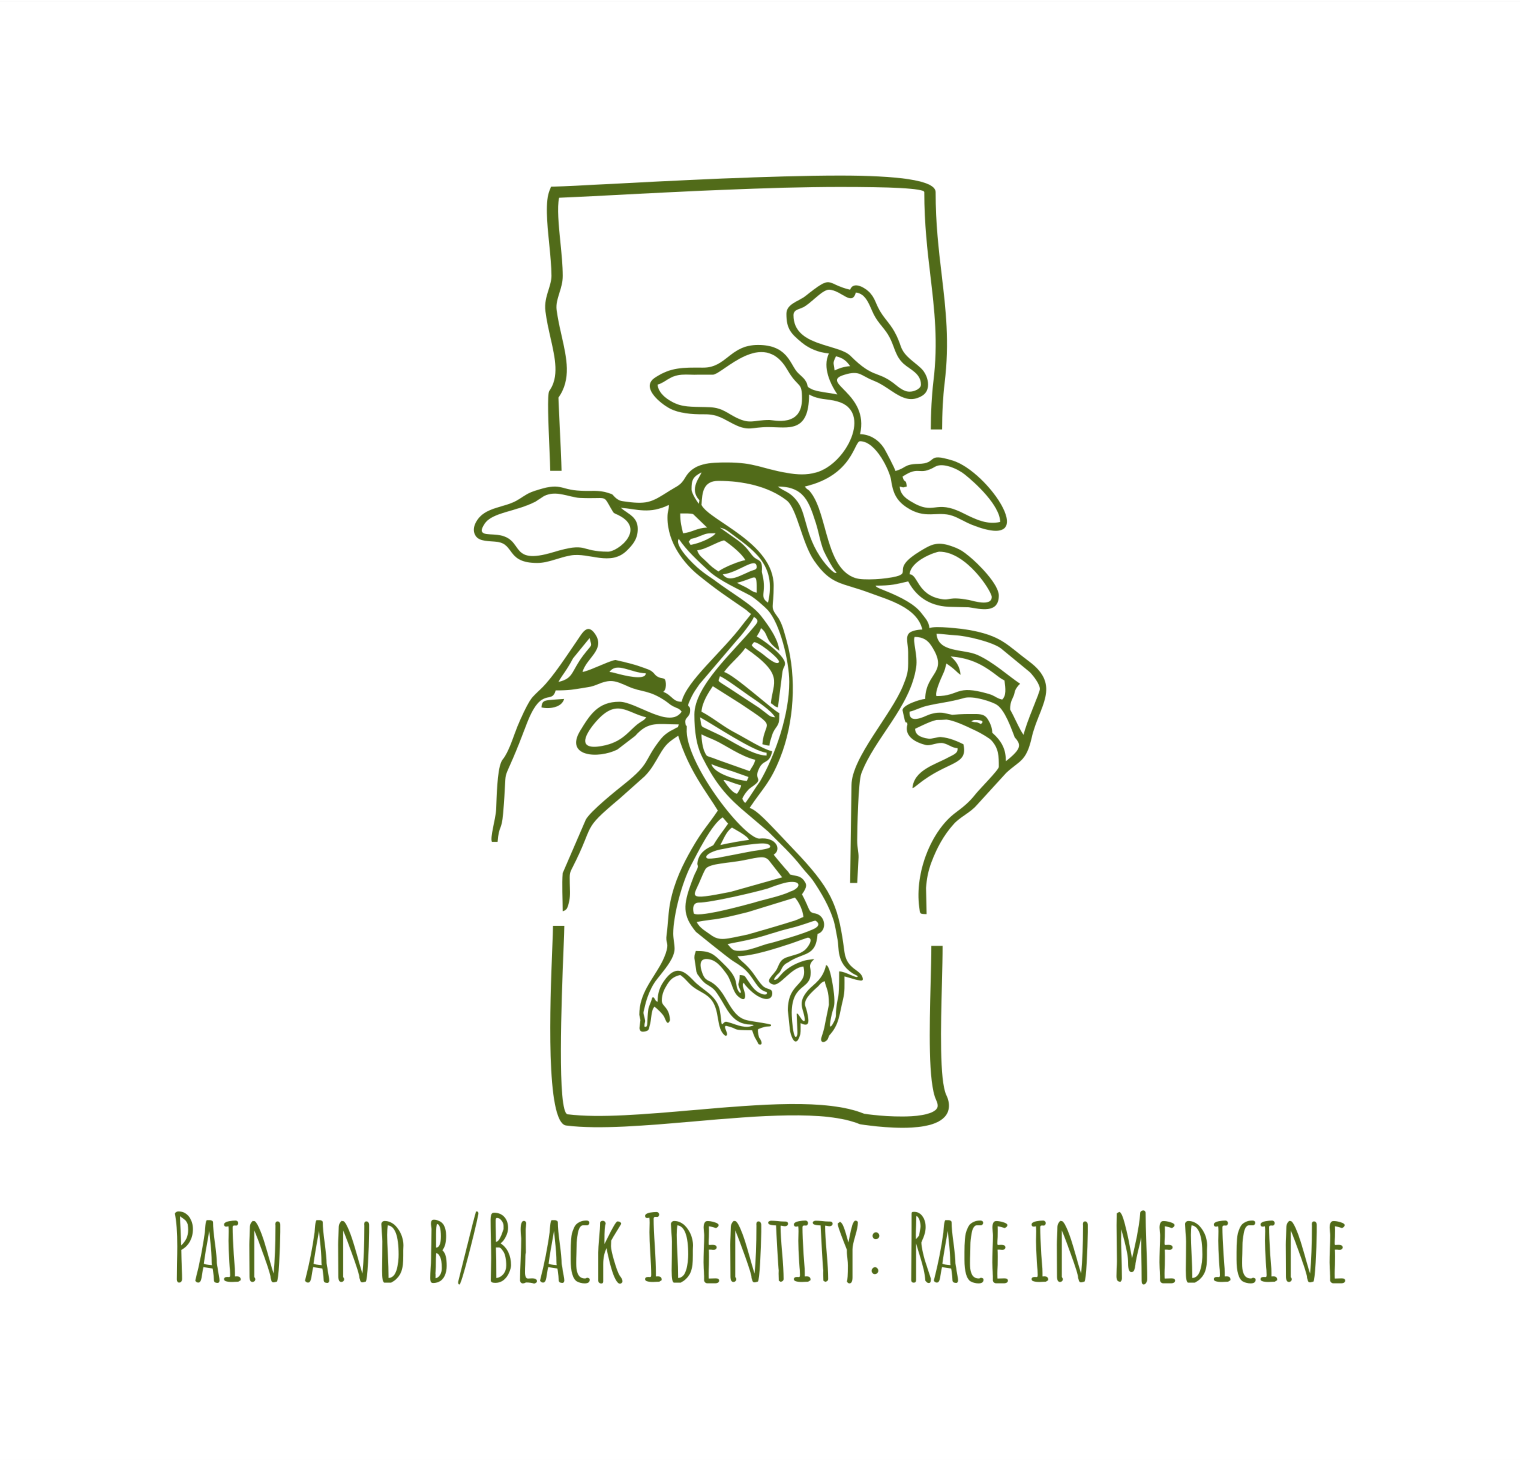 Pain and b/Black Identity: Race in Medicine